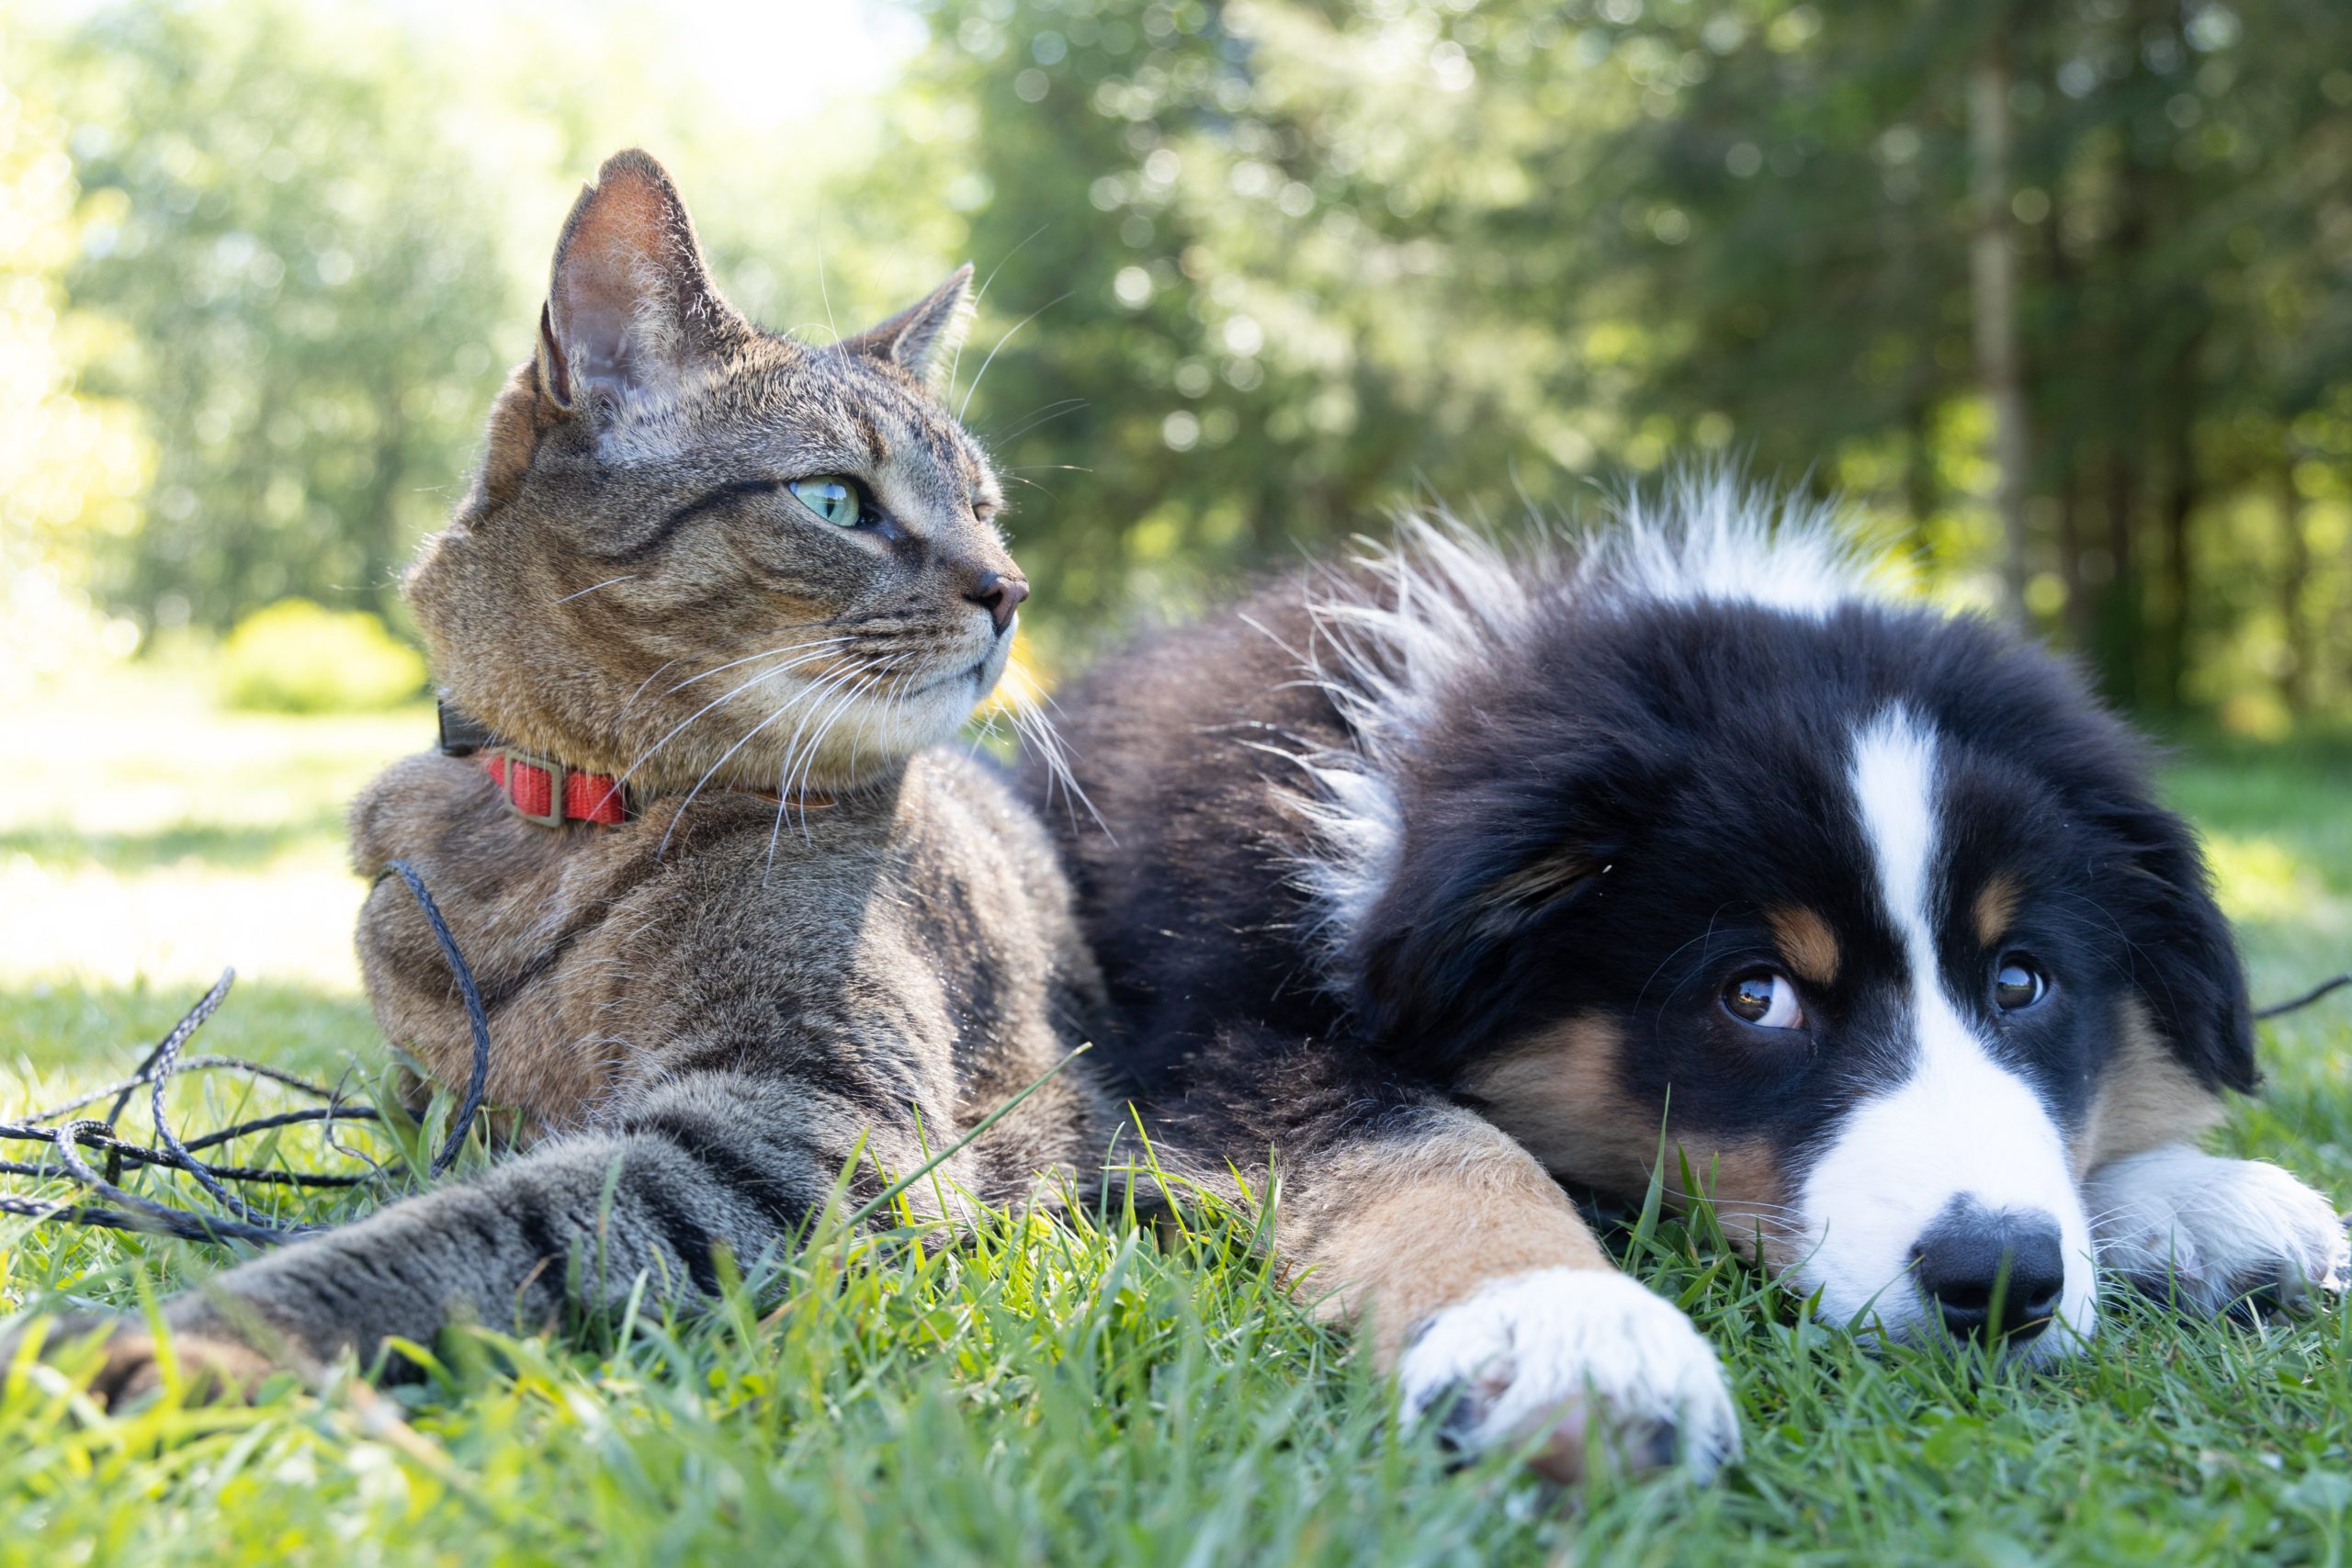 Cat and Dog Relaxing